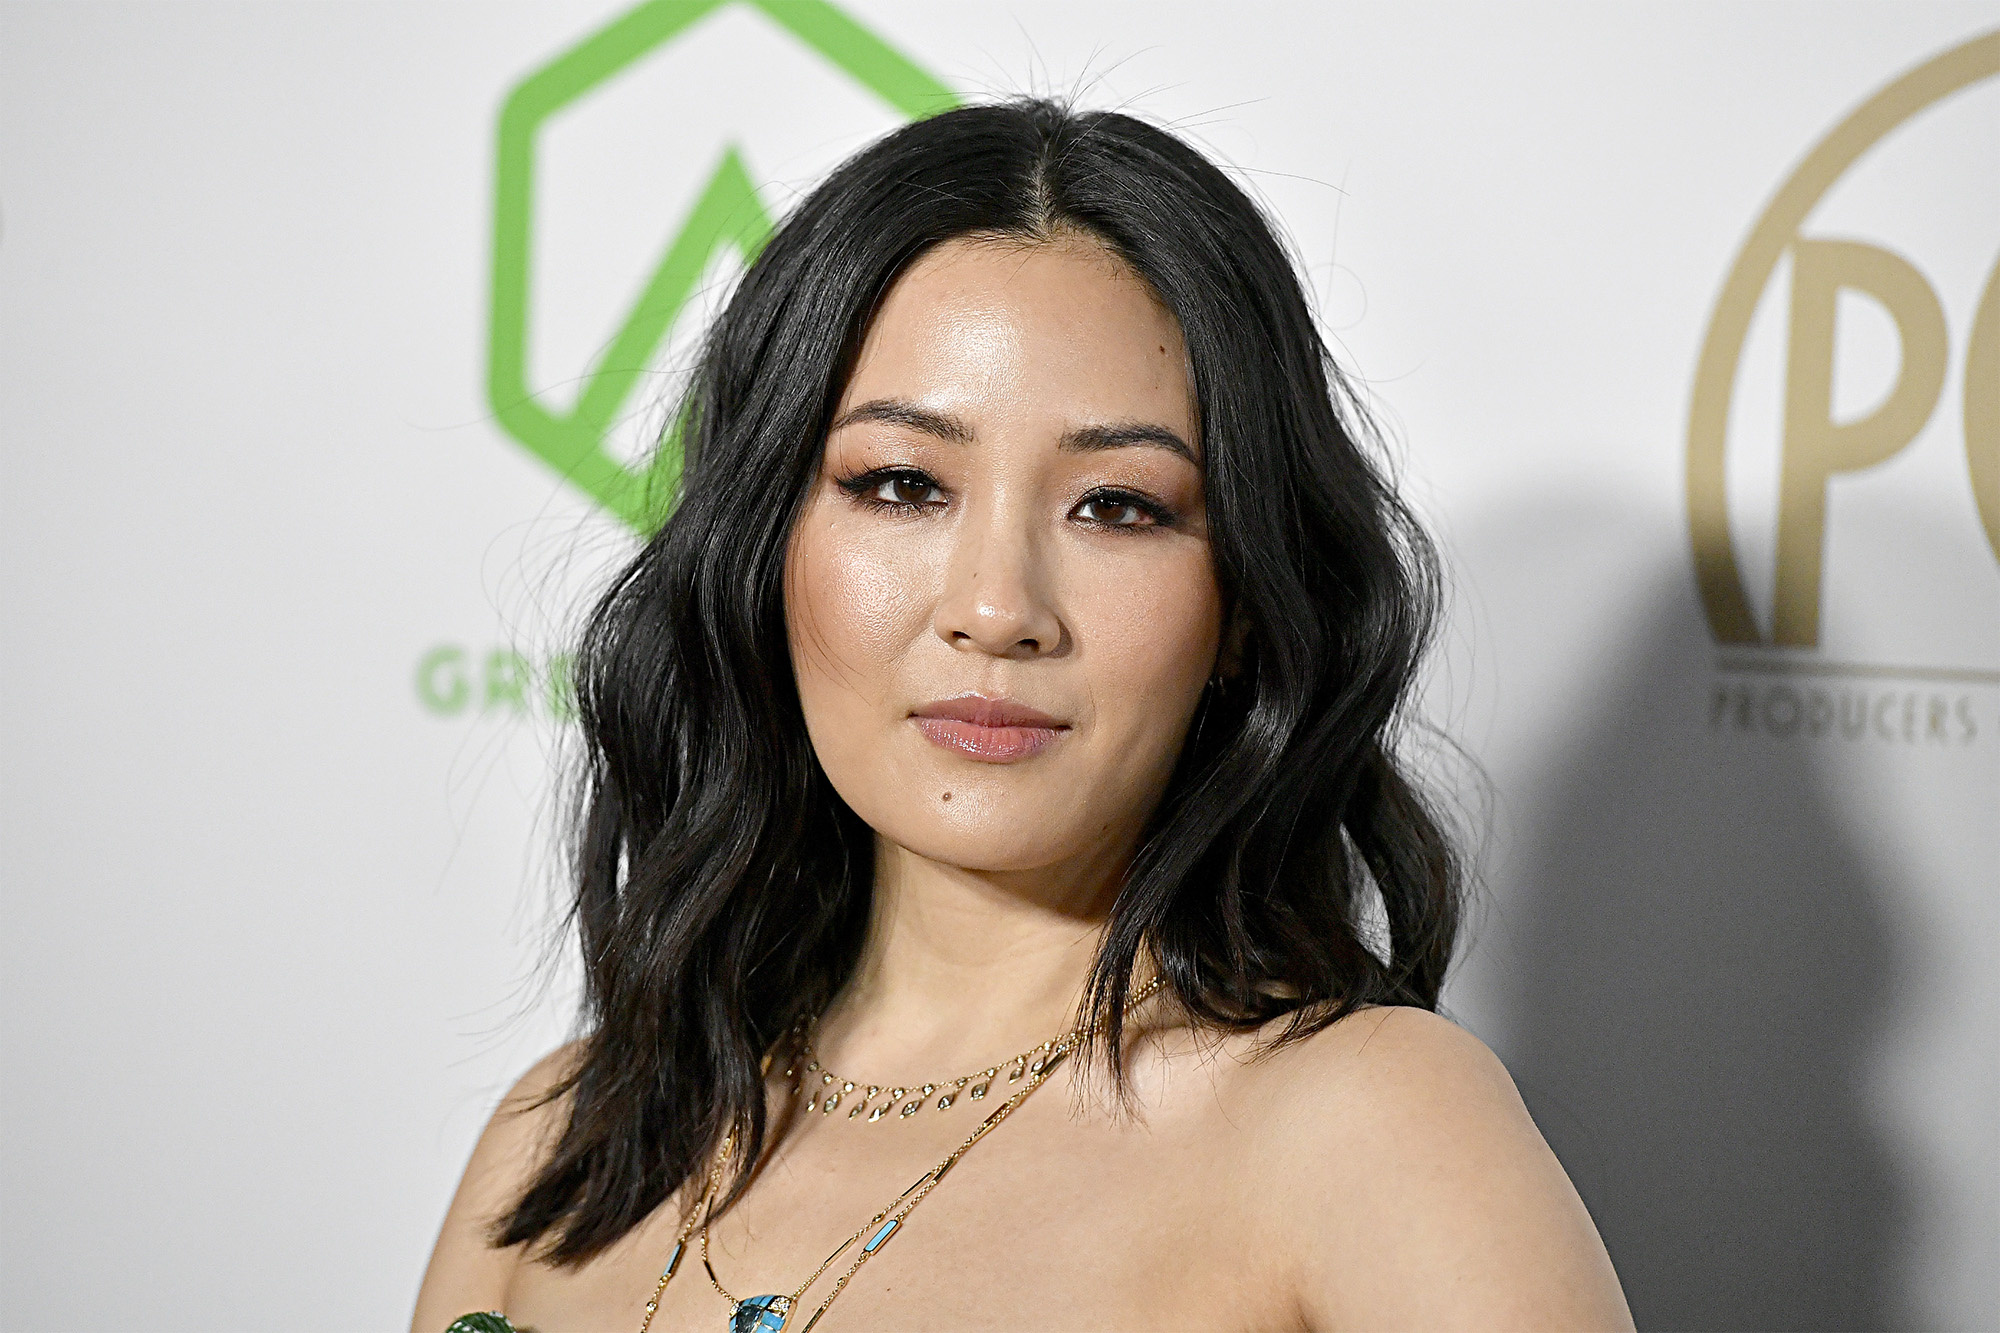 Constance Wu films, Undercover stripping, Movie earnings, Hollywood actress, 2000x1340 HD Desktop